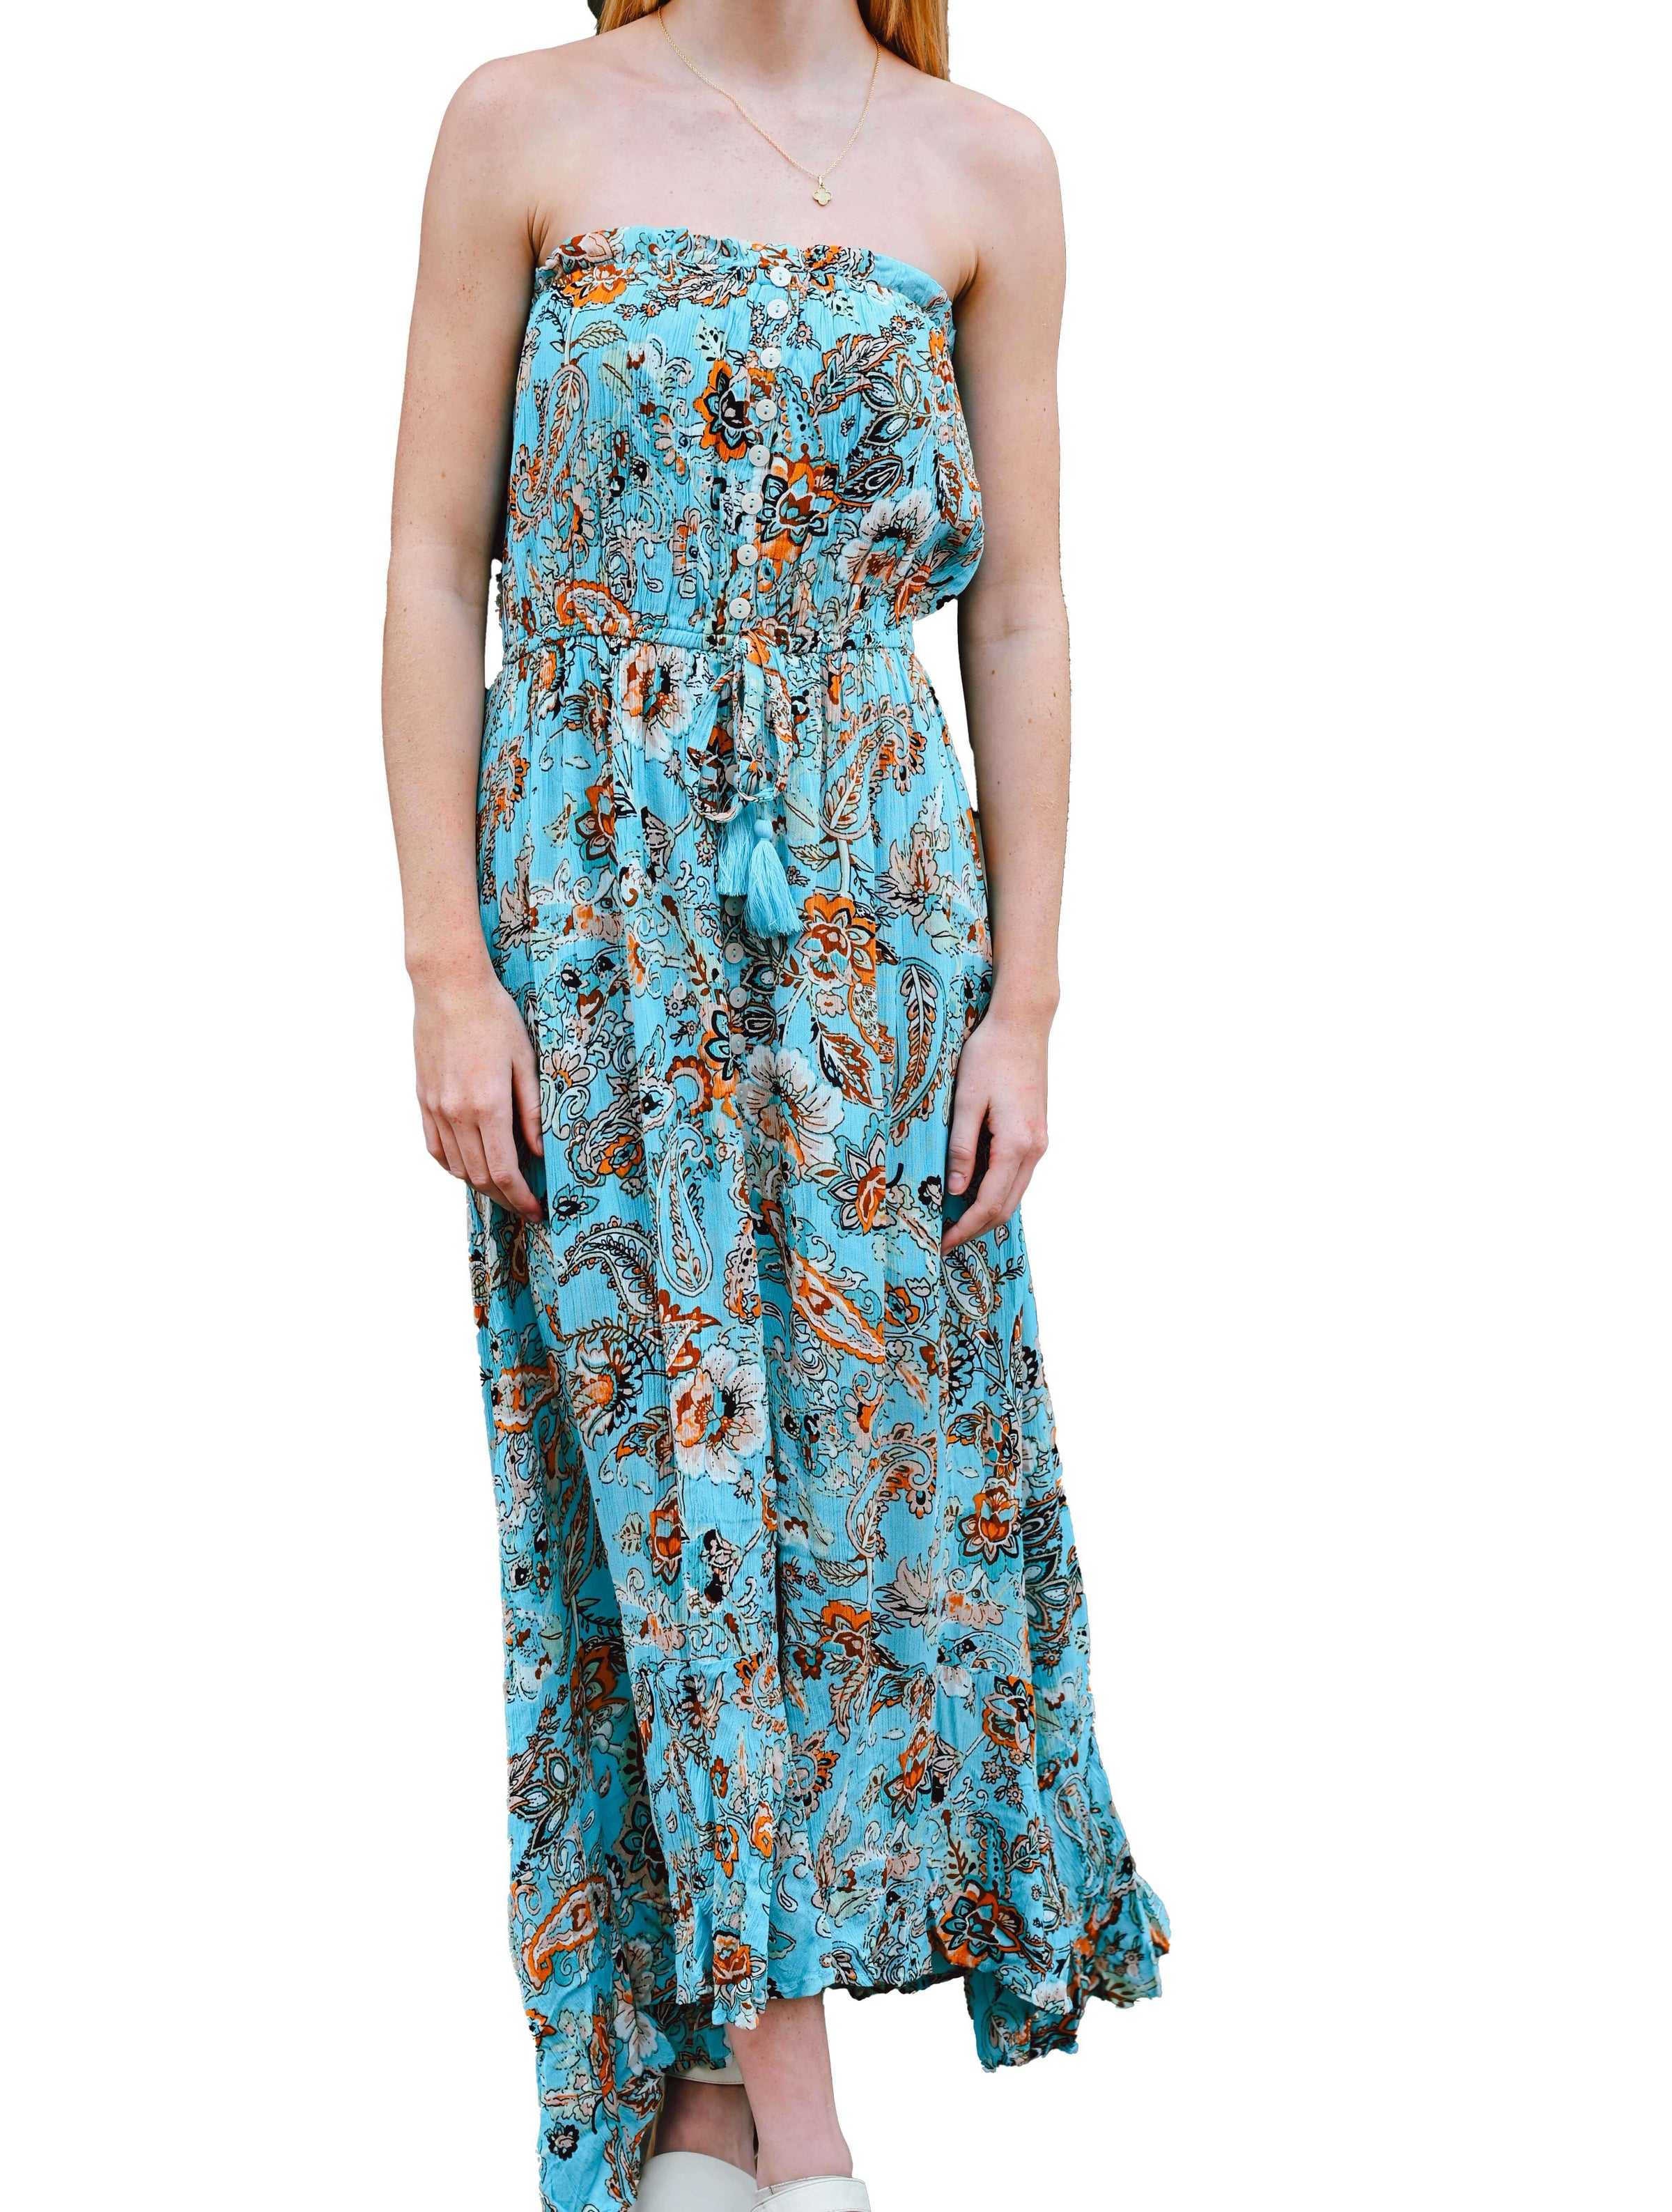 Maxi Strapless Front Slit Dress in Turquoise Floral